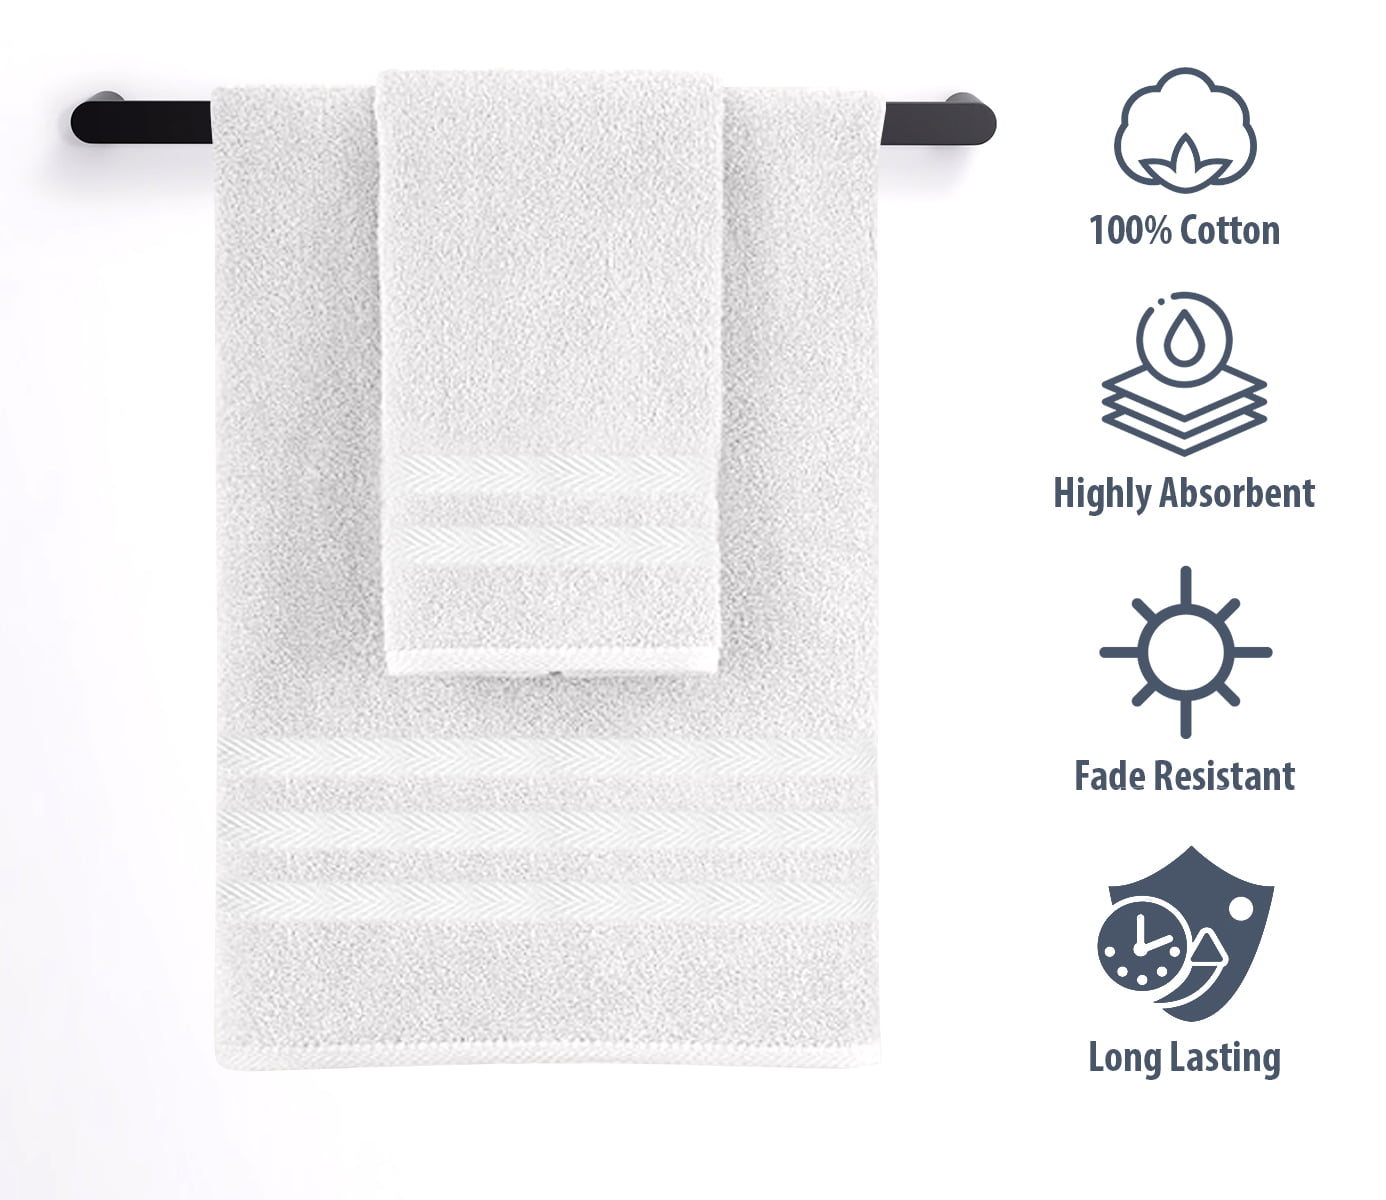 Feather & Stitch 6 Piece Sets of Bathroom Towels - 100% Cotton High Quality  - Fade Resistant Hotel Collection Bath Towel Set - 2 Bath Towels, 2 Hand  Towels & 2 Washcloth - Aqua 